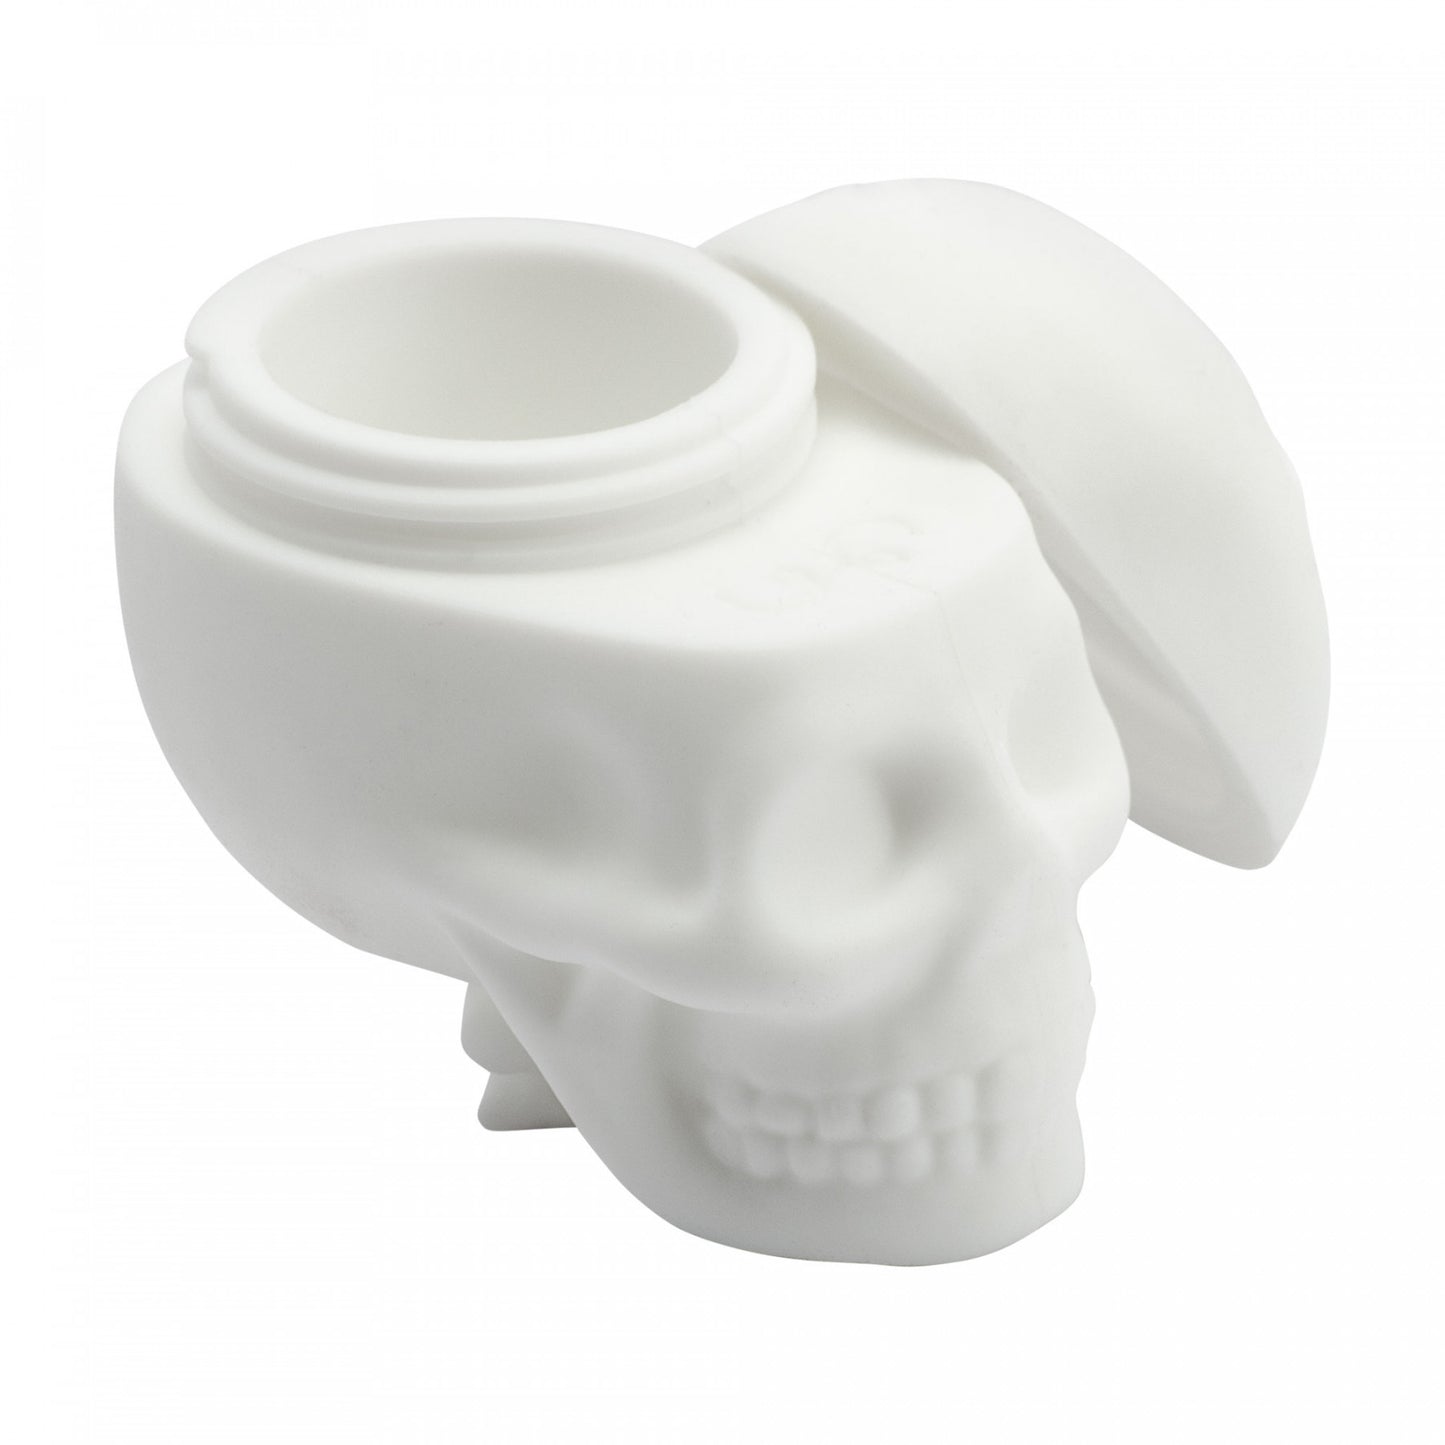 White Silicone Jar in the space of a skull with the lid to the side of the jar